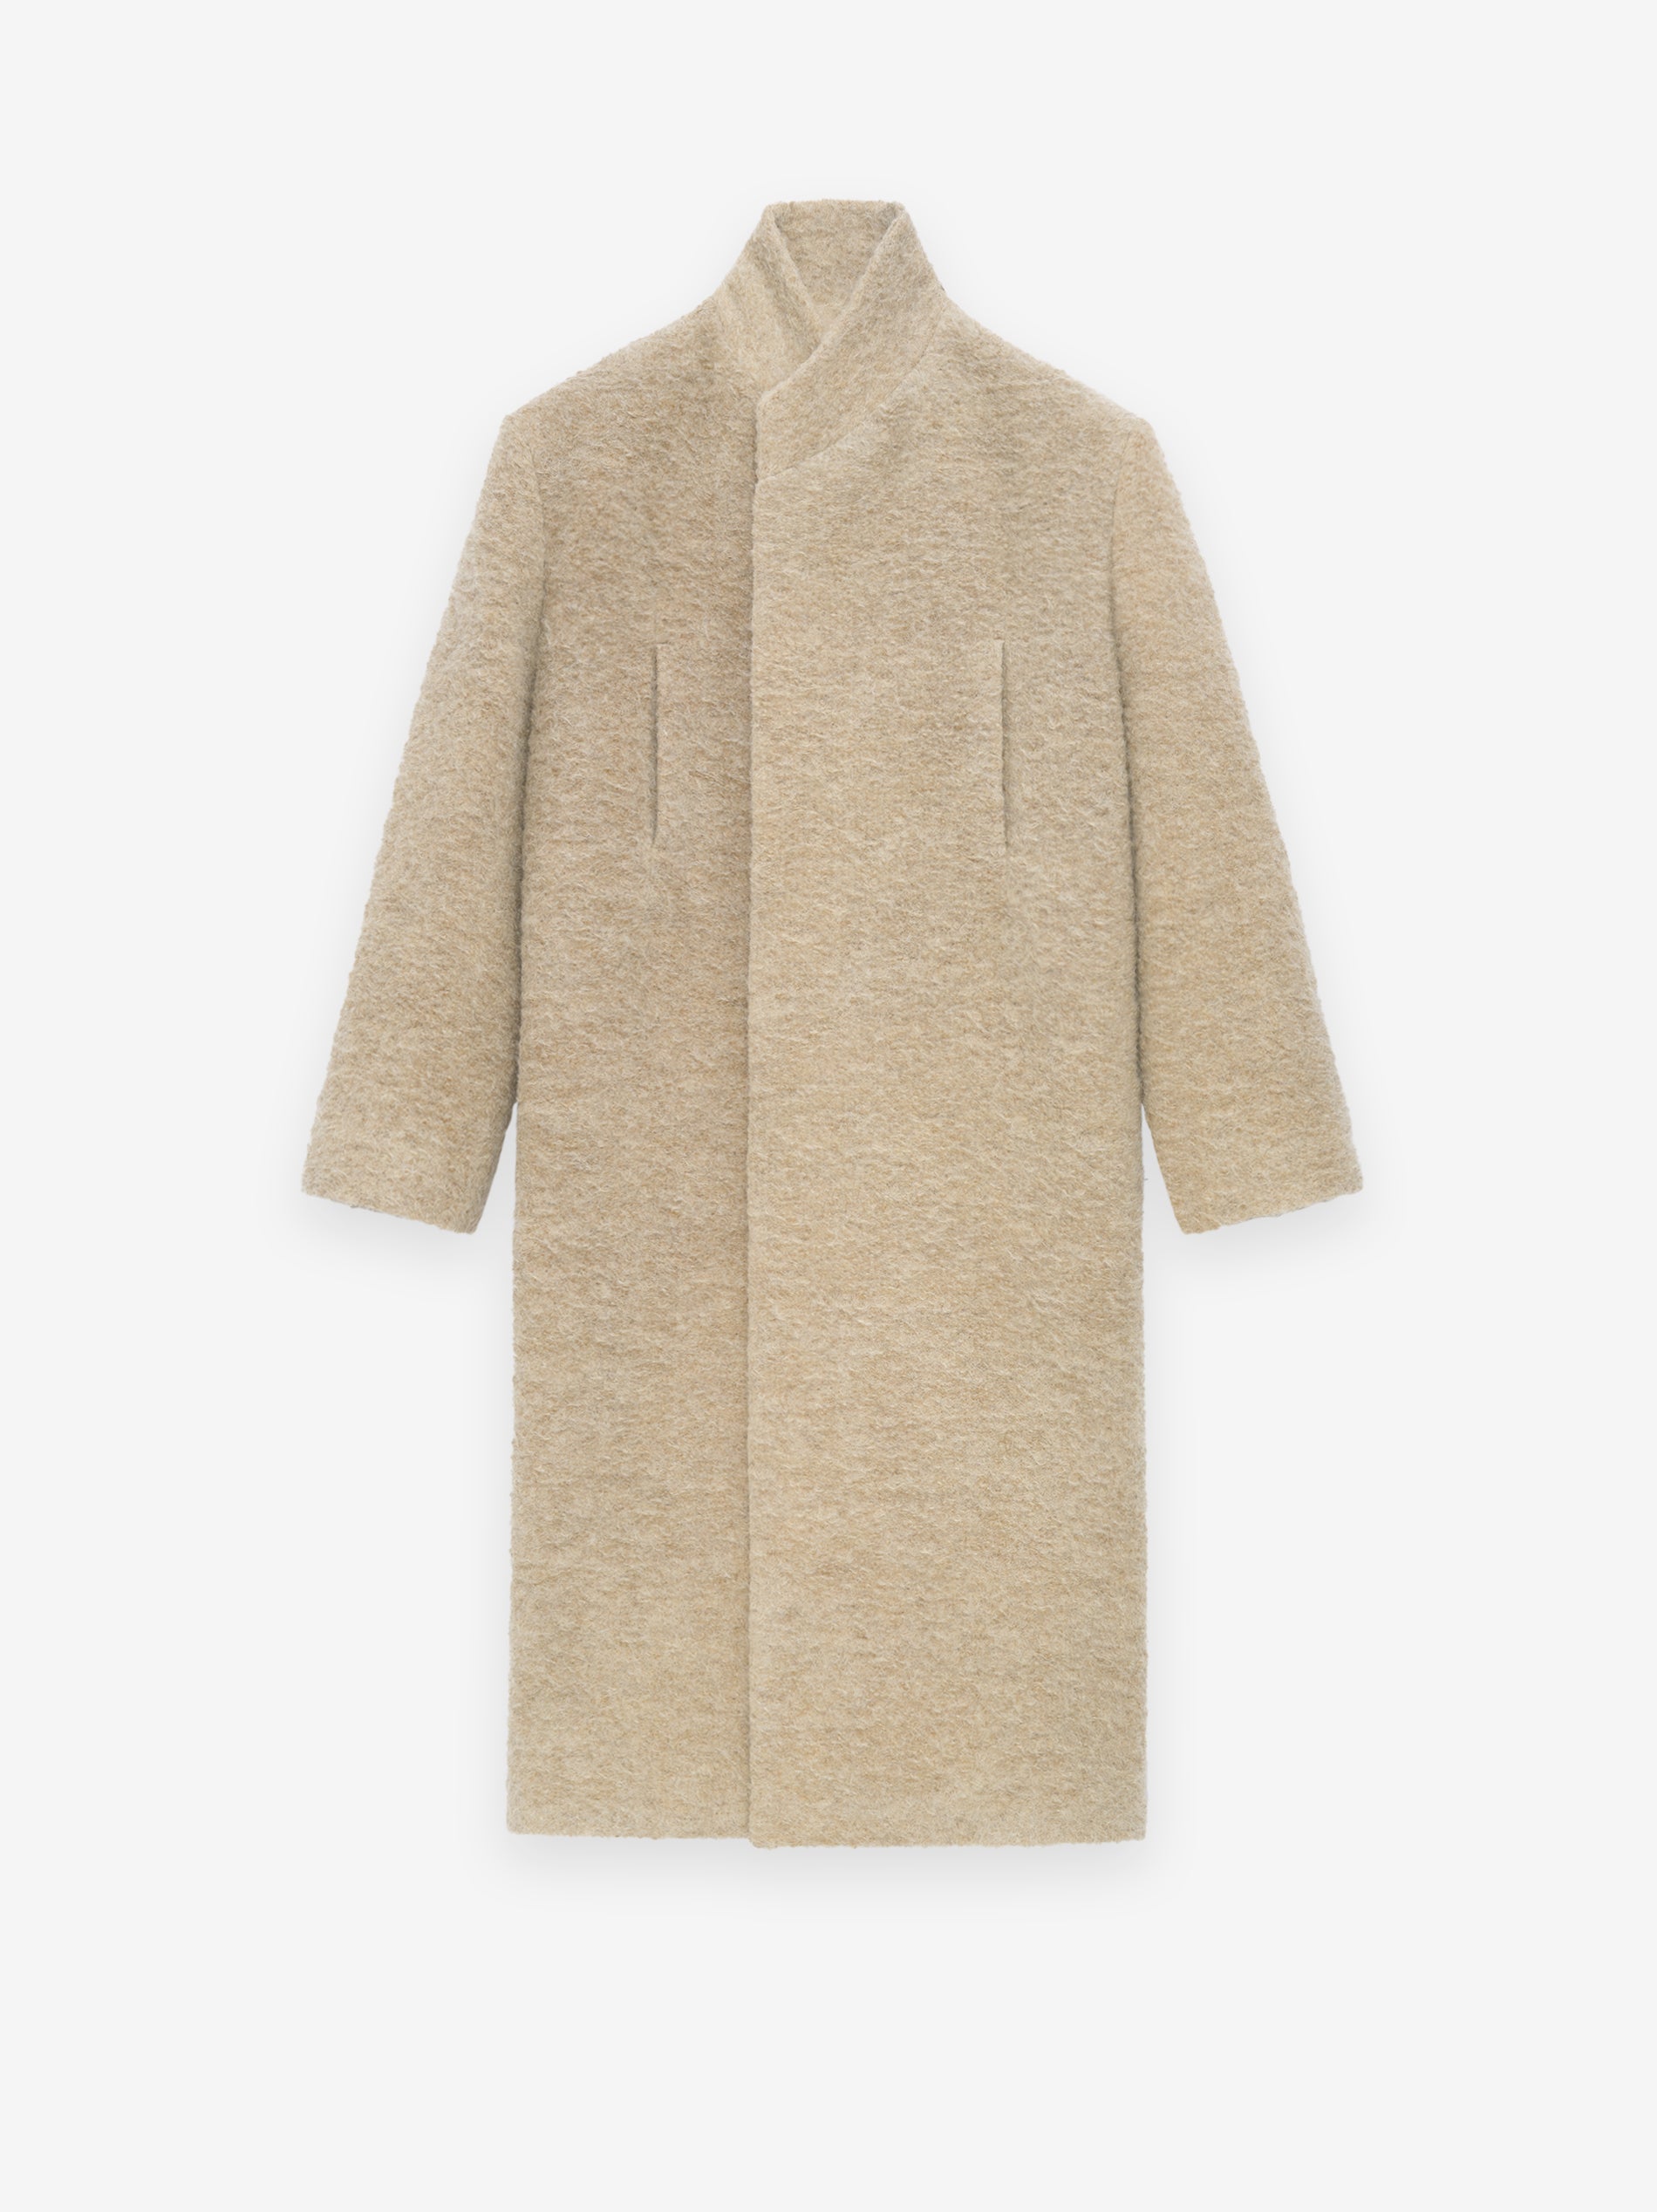 Wool Boucle Stand Collar Overcoat | Fear of God